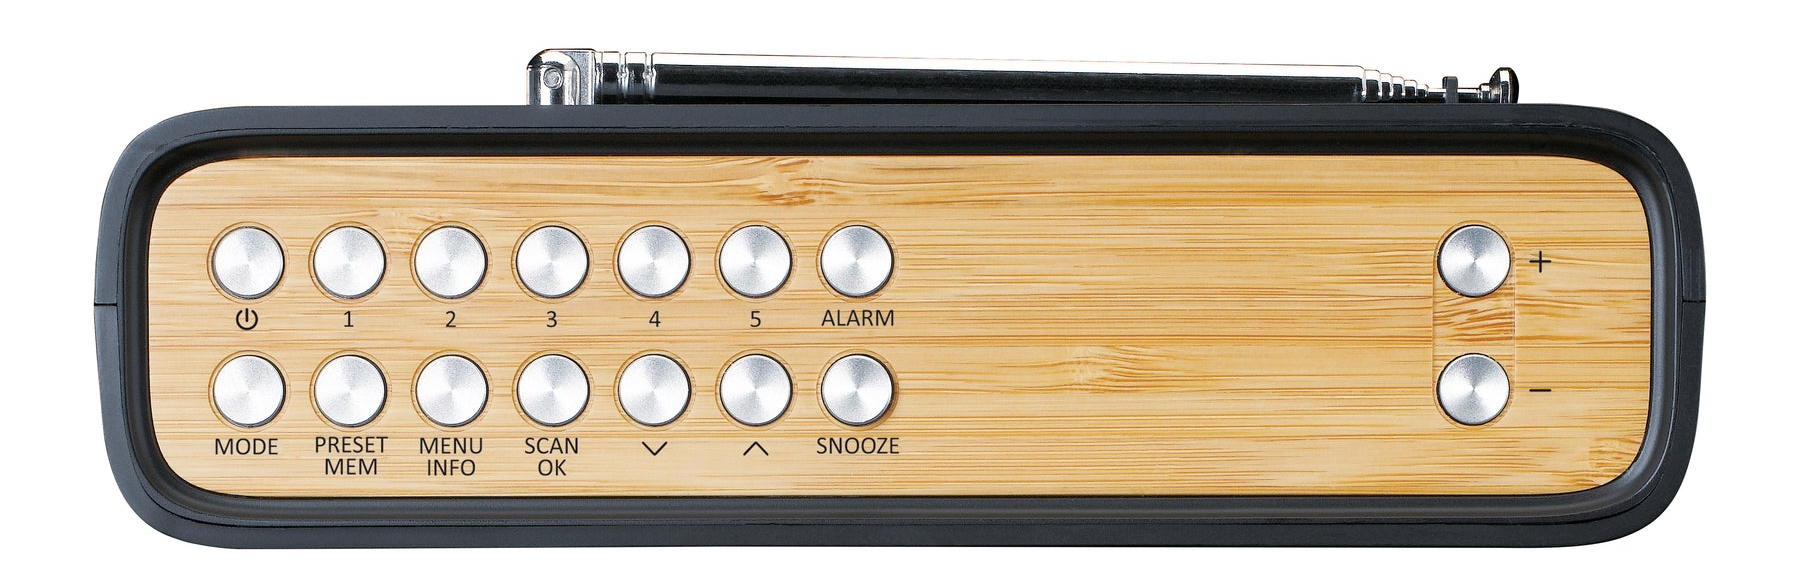 Lenco launches DAB+/FM Radio & Bluetooth Speakers, made with wheat fibre  and natural bamboo - Coolsmartphone | Digitalradios (DAB+)